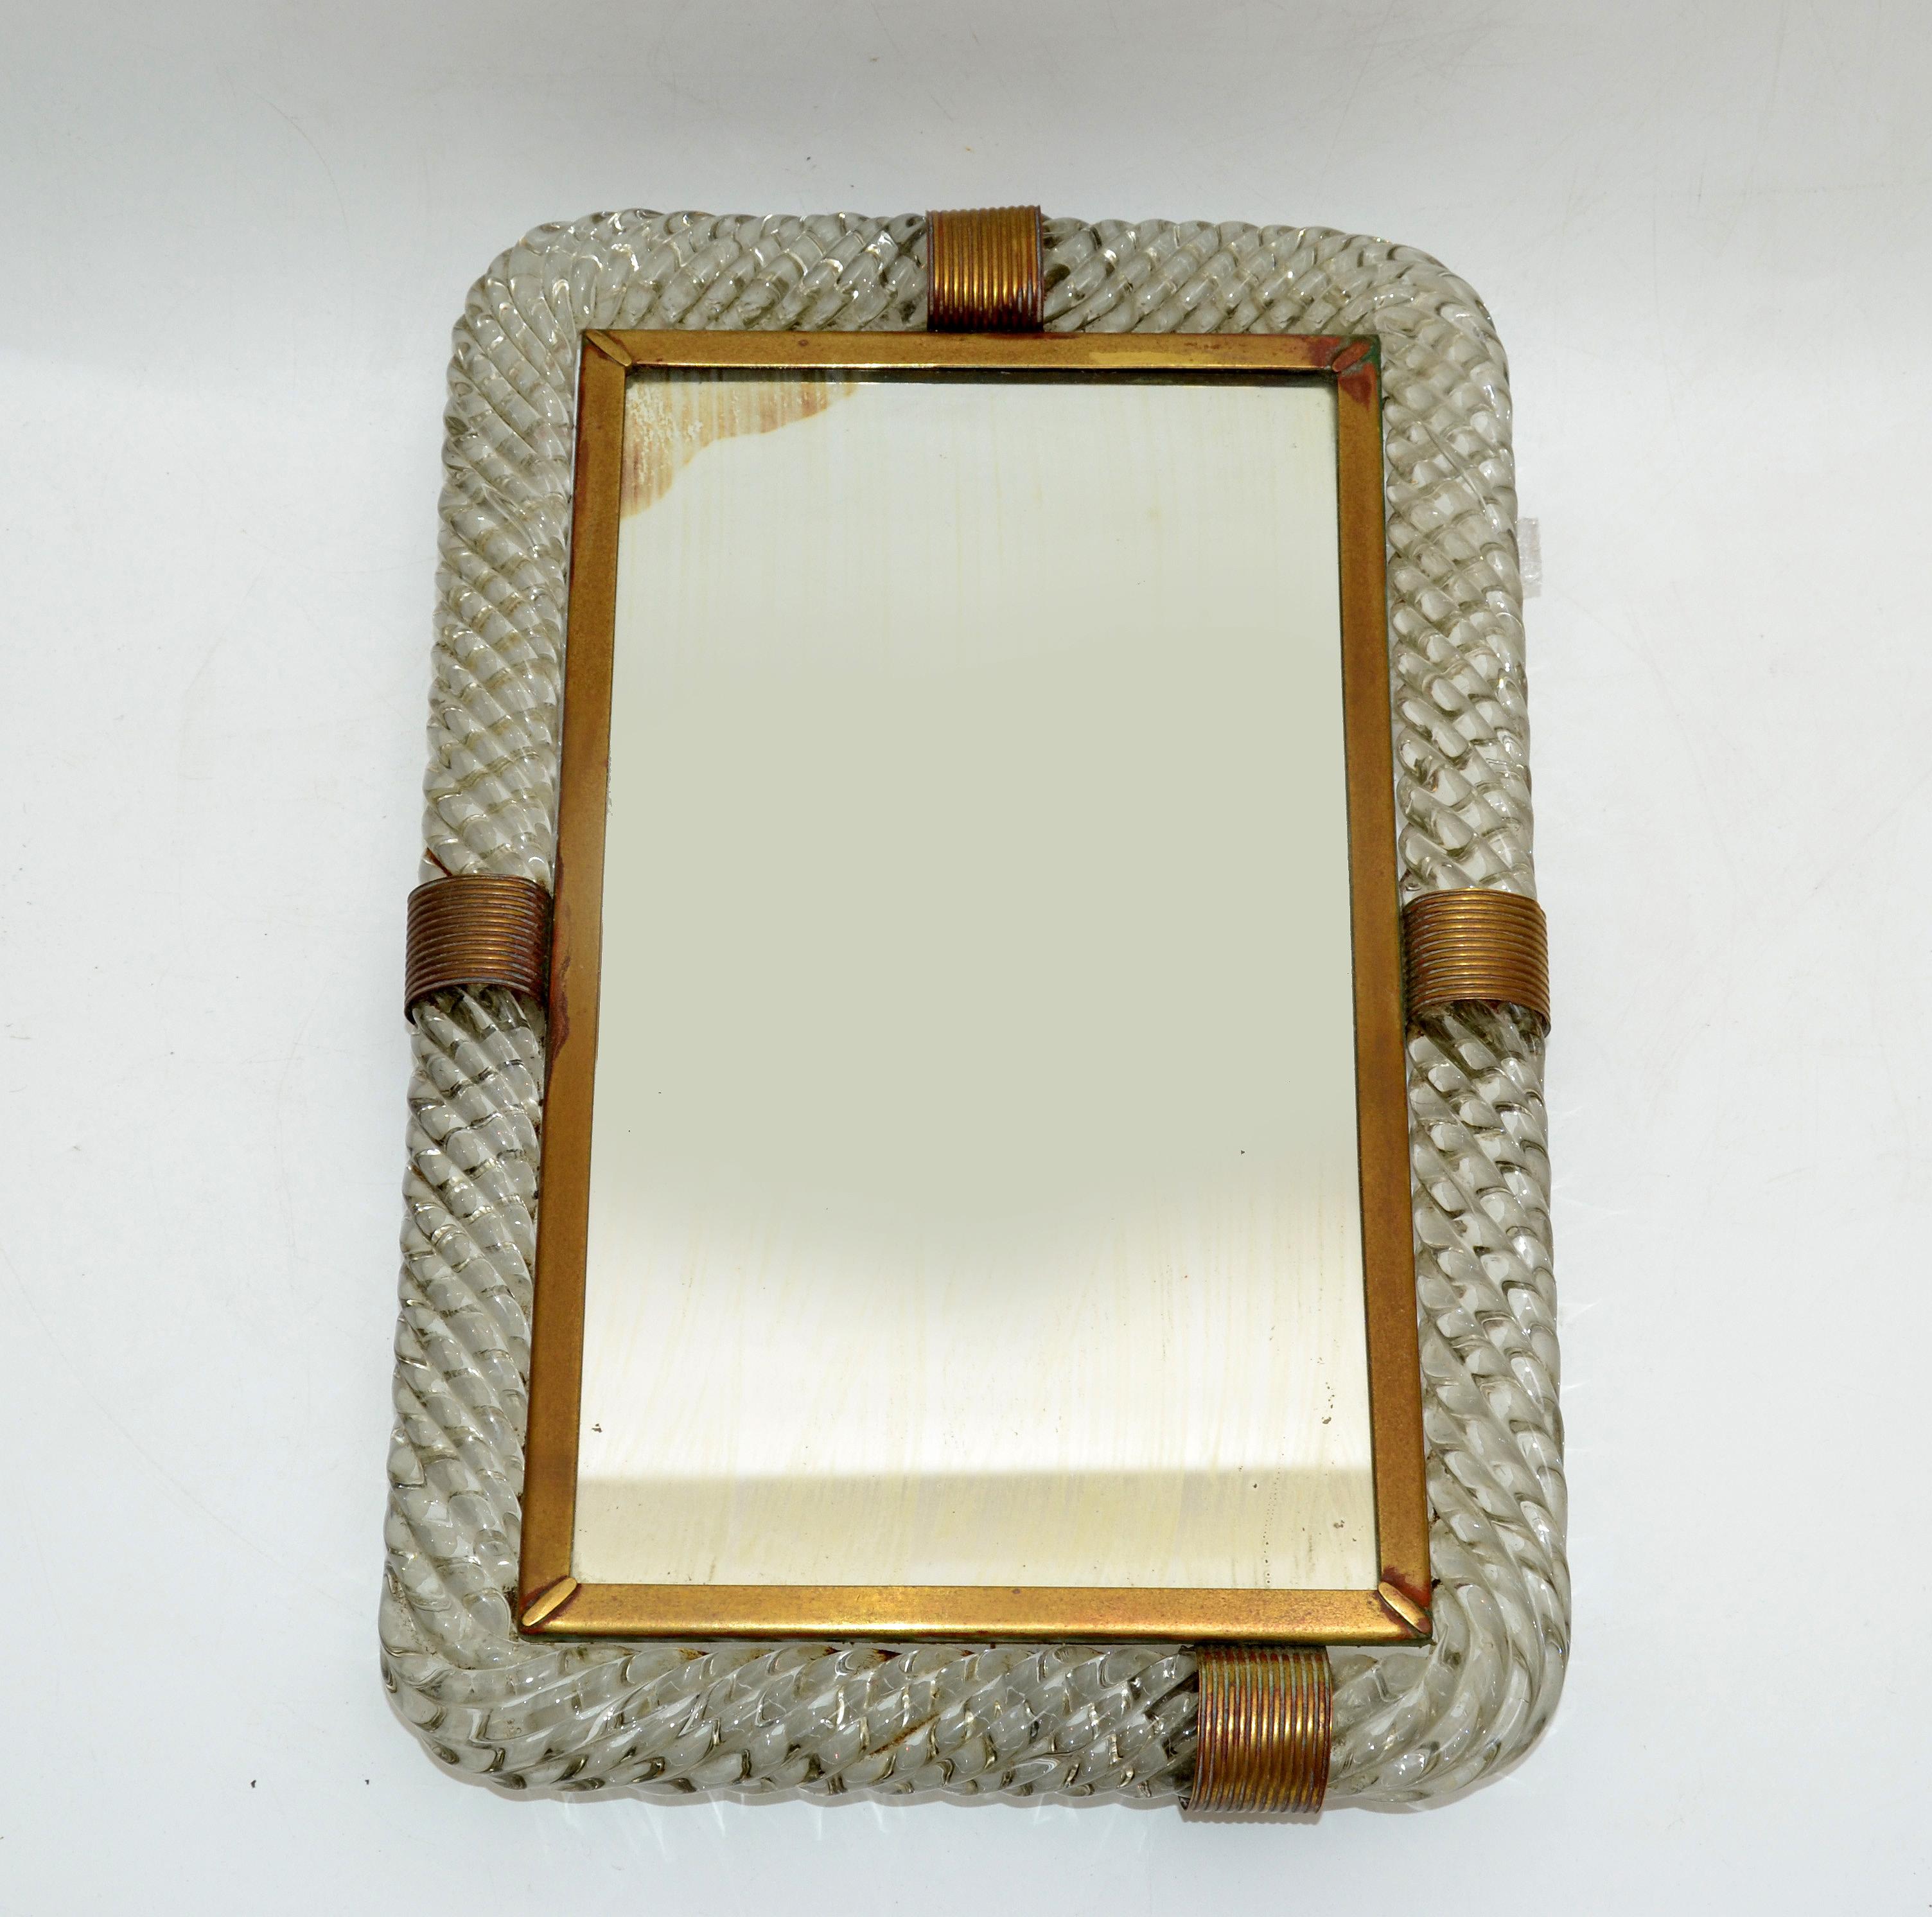 Venetian mirrored tray or table mirror made in Italy in the 1940s.
Created in blown twisted Murano glass mounted into a brass frame.
The base is covered in green felt to protect Your furniture.
Great also for Your Vanity to display the perfume